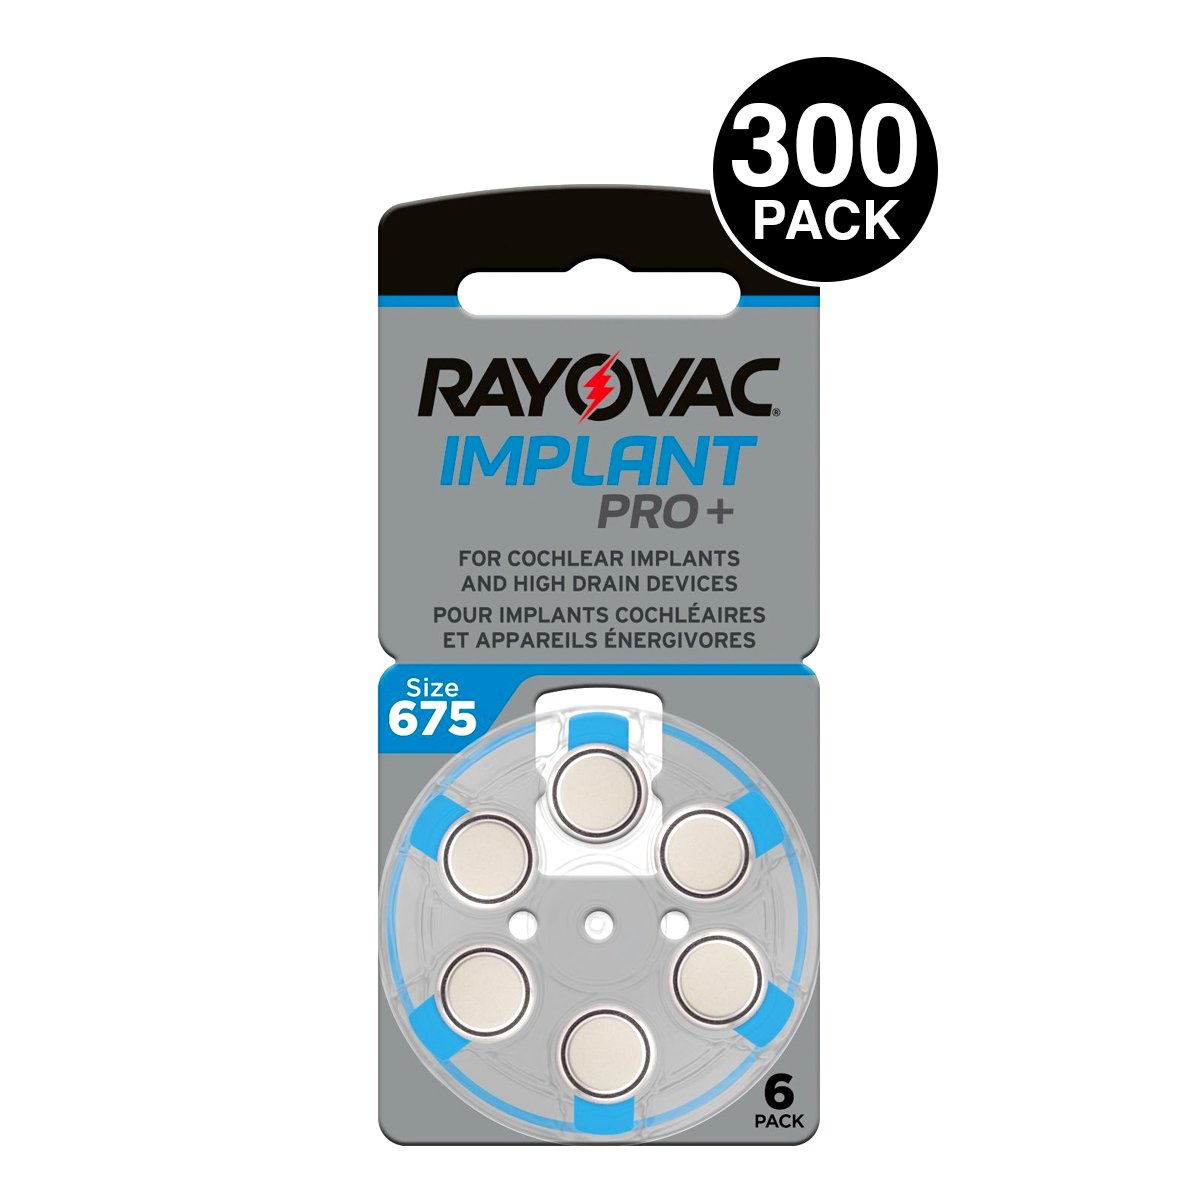 Rayovac Implant Pro, 675P Cochlear Implant Batteries (300 Pcs)